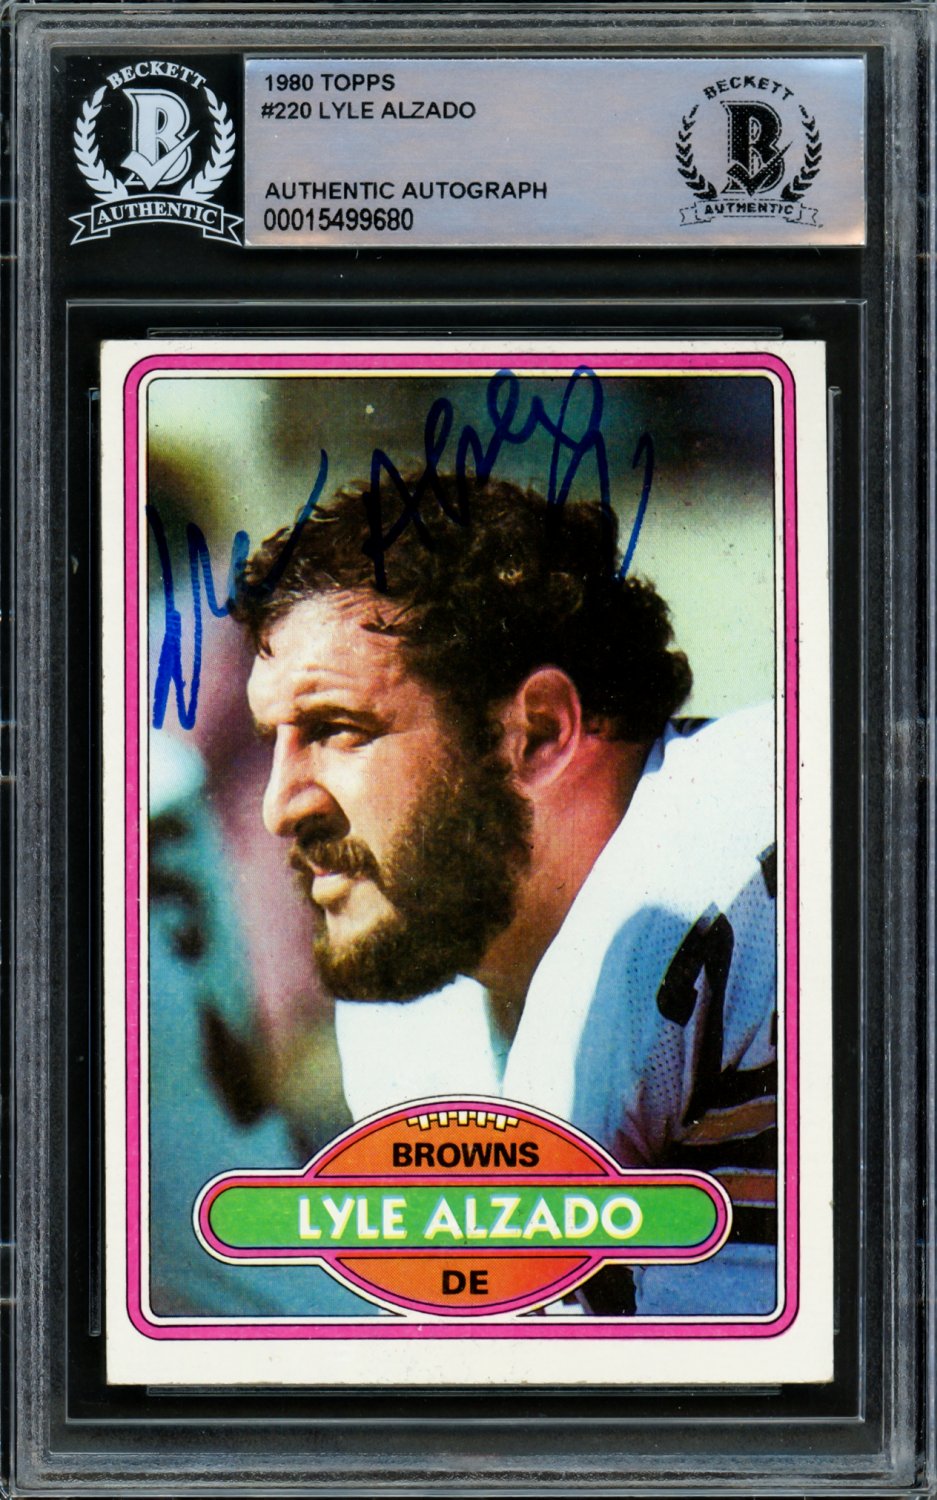 Lyle Alzado Autographed Signed 1980 Topps Card #220 Cleveland